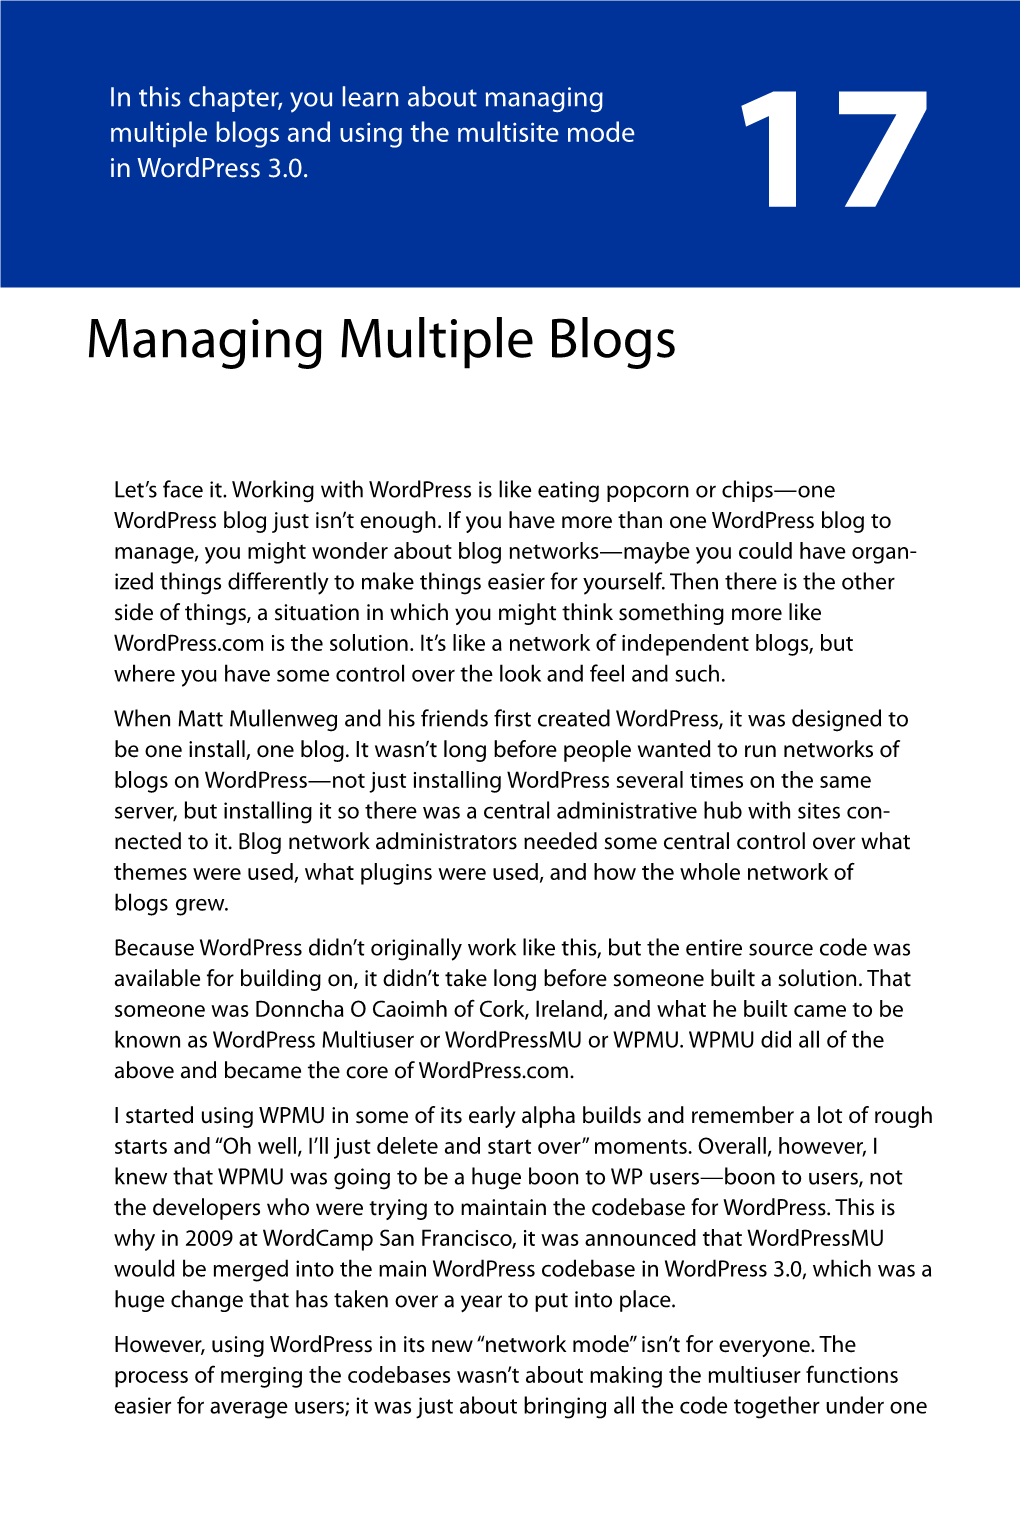 Managing Multiple Blogs and Using the Multisite Mode in Wordpress 3.0